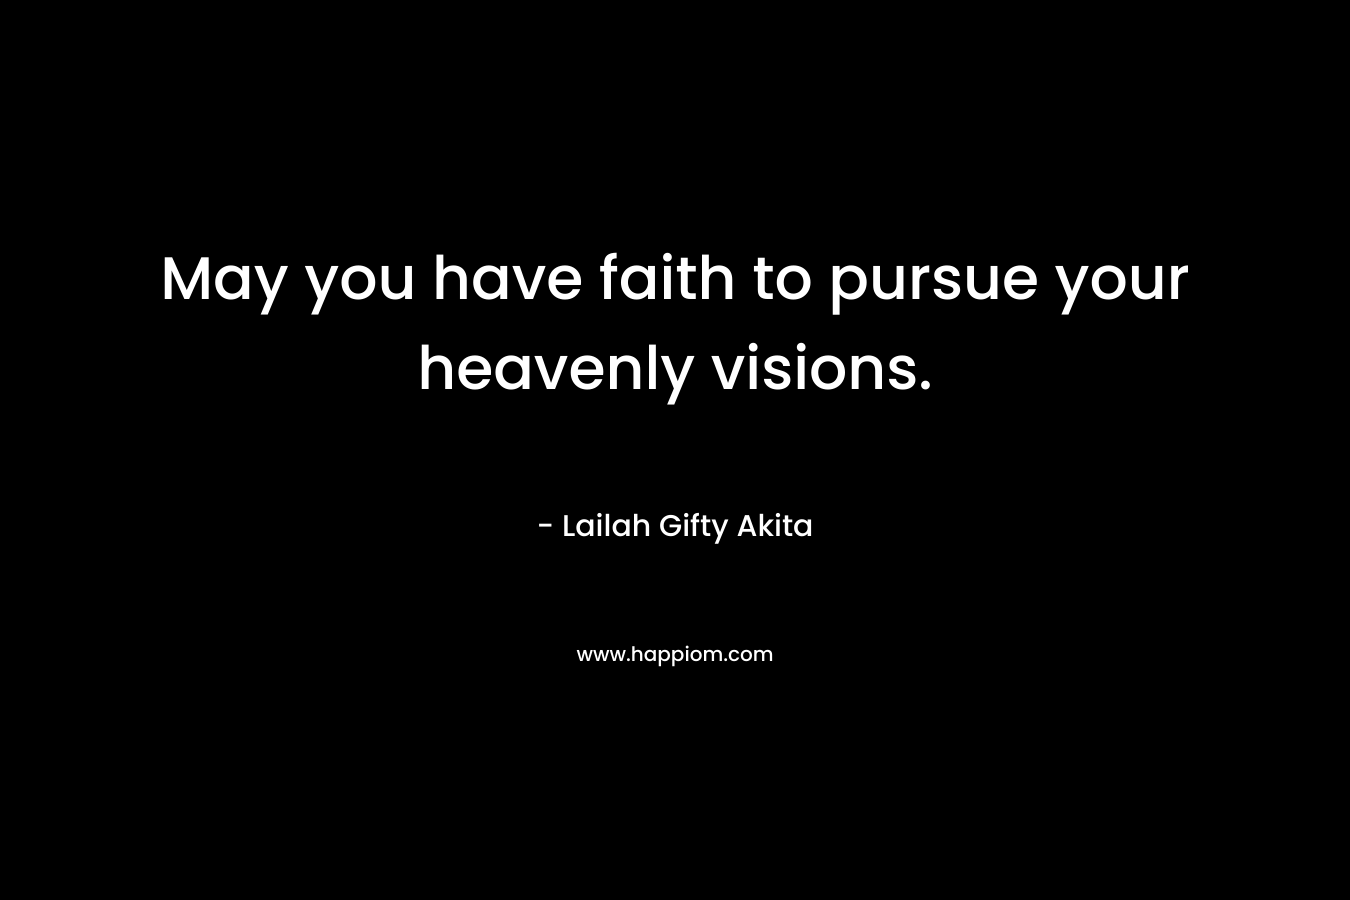 May you have faith to pursue your heavenly visions.